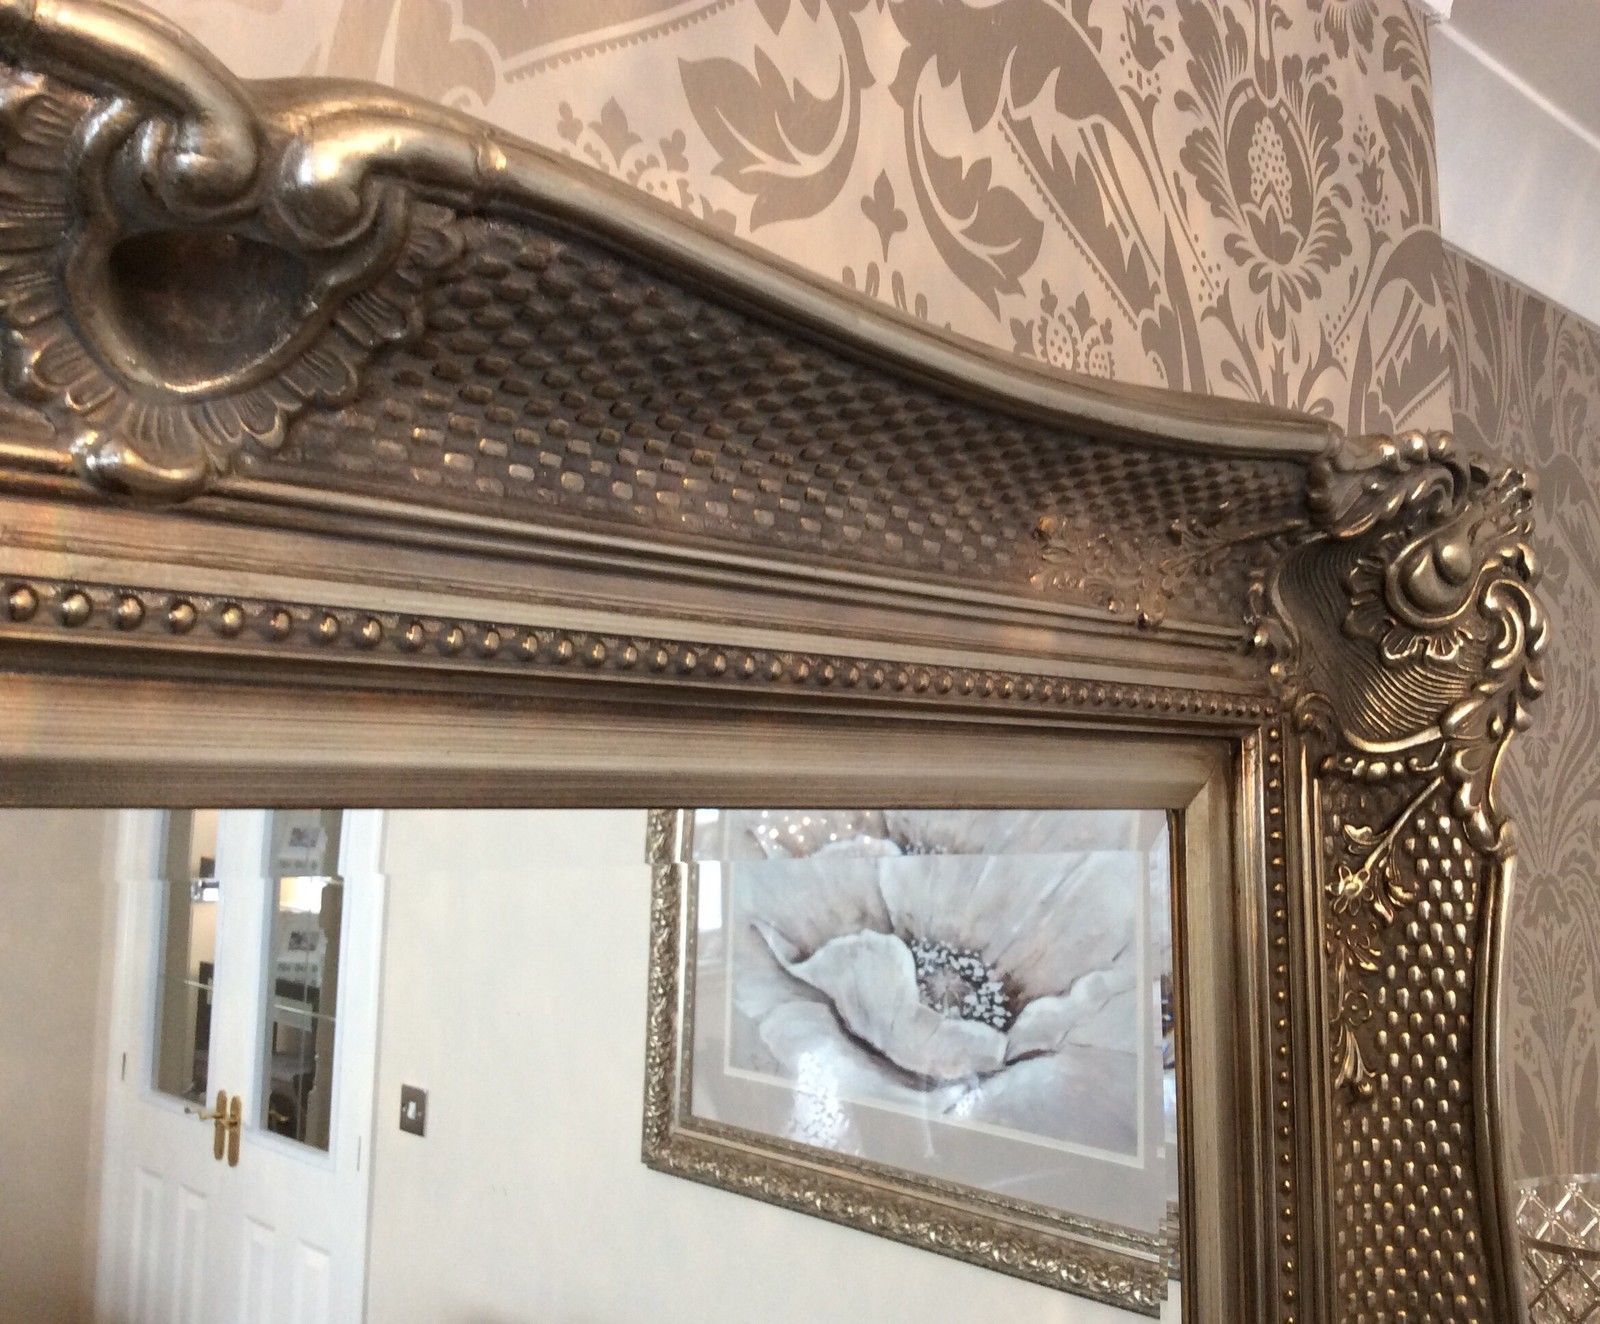 Wonderful Ornate Fabulous Extra Large Wall Mirror – Range Of Sizes – Save S Pertaining To Oversized Wall Mirrors (View 4 of 15)